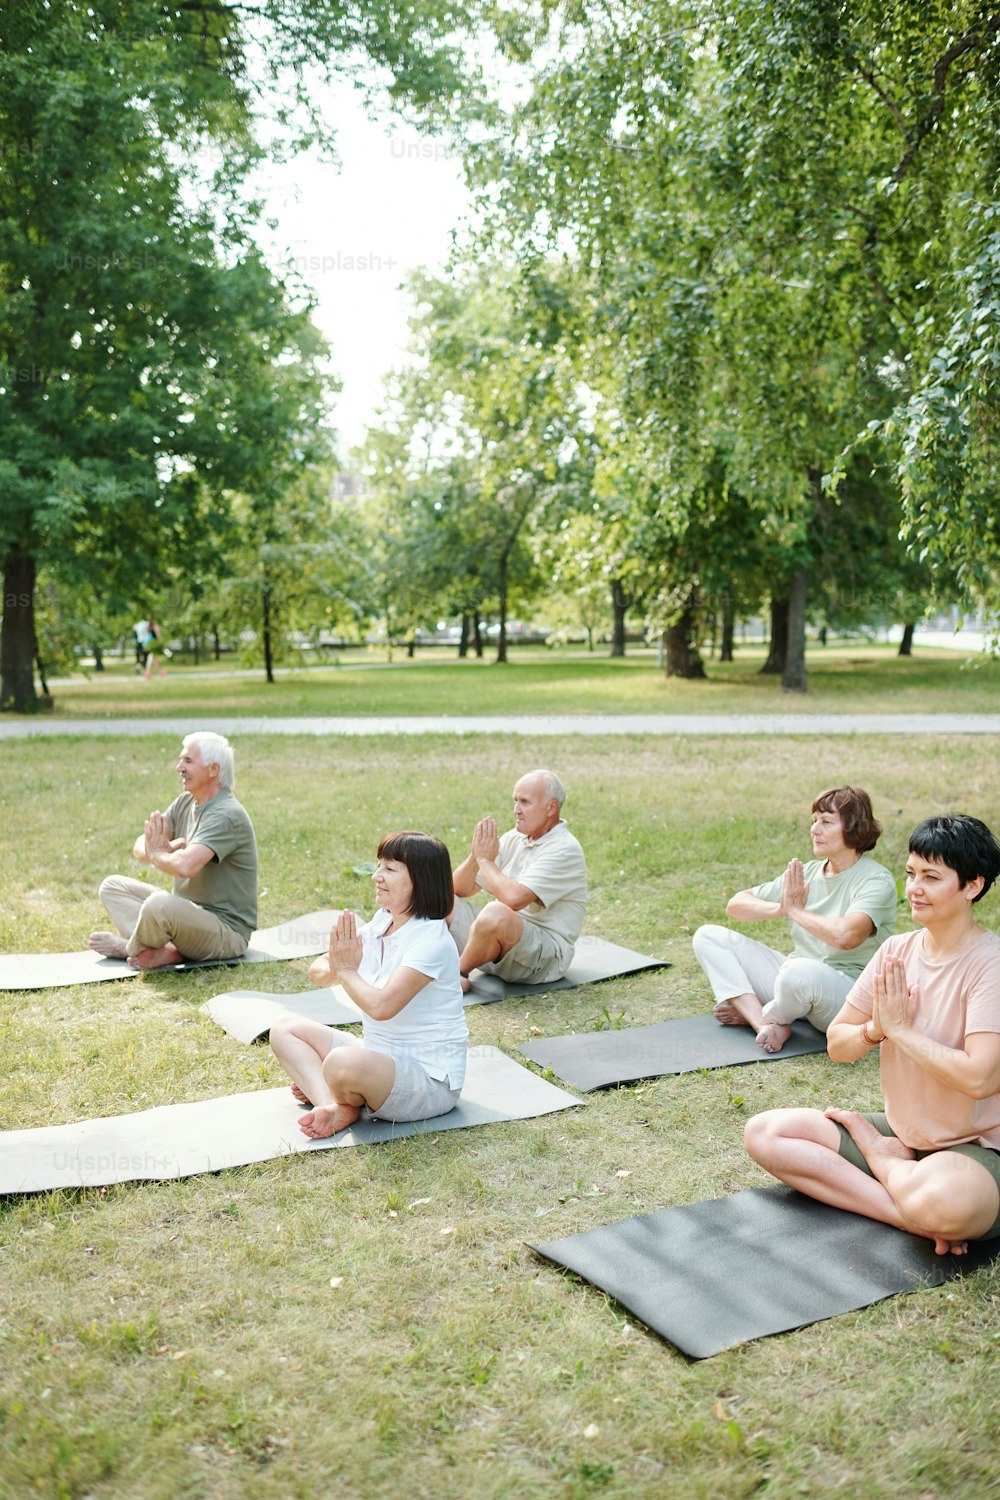 Group of people sitting on the grass with eyes closed and meditating during yoga classes outdoors